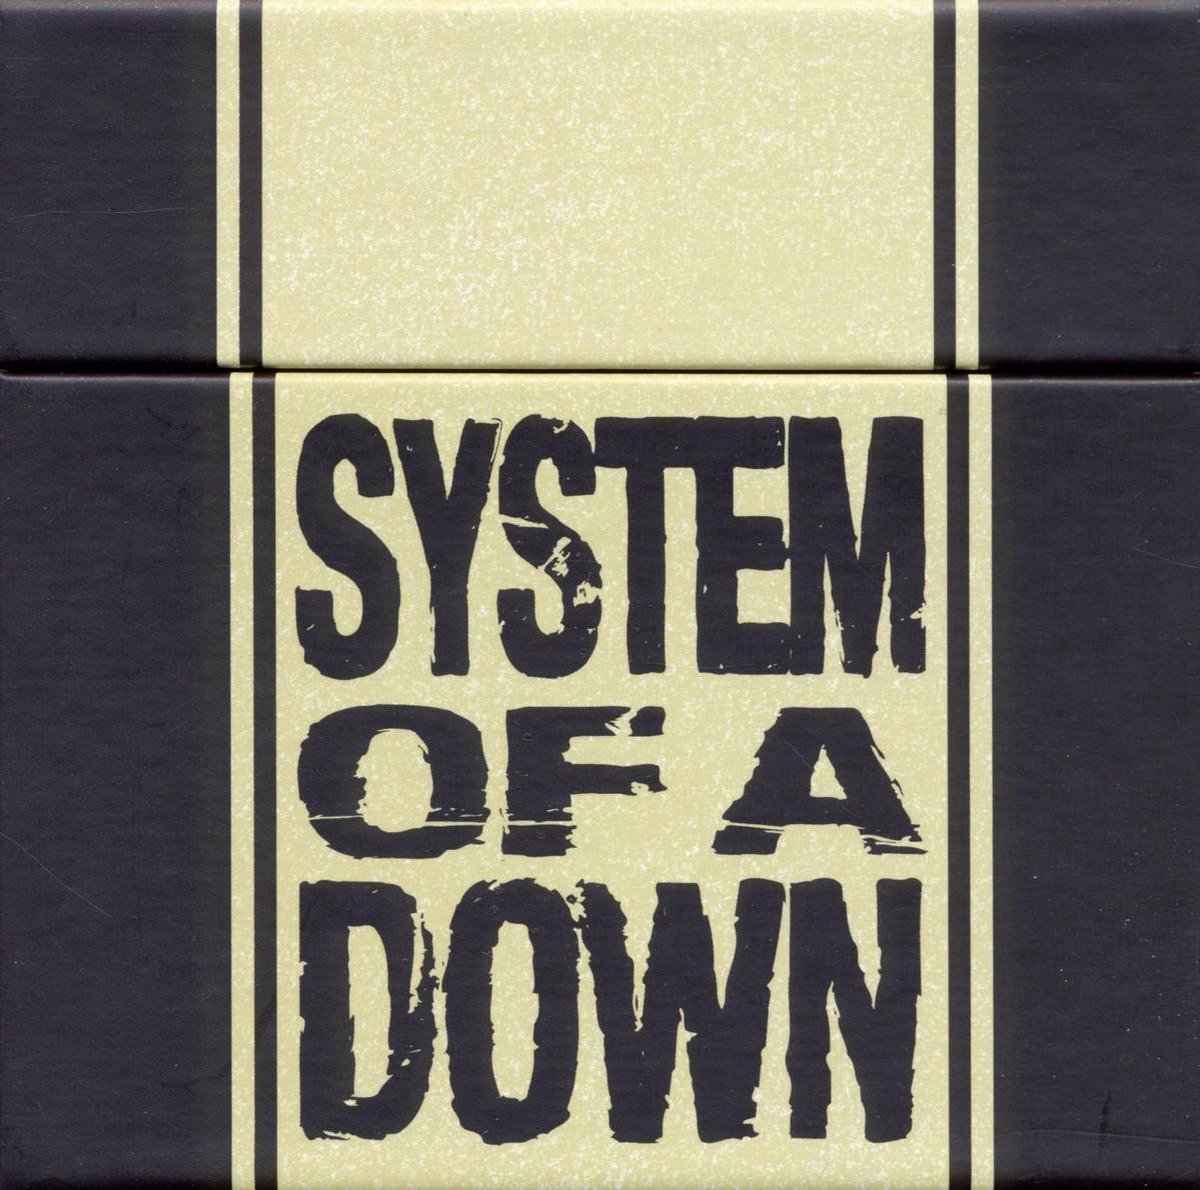 system of a down full album download torrent